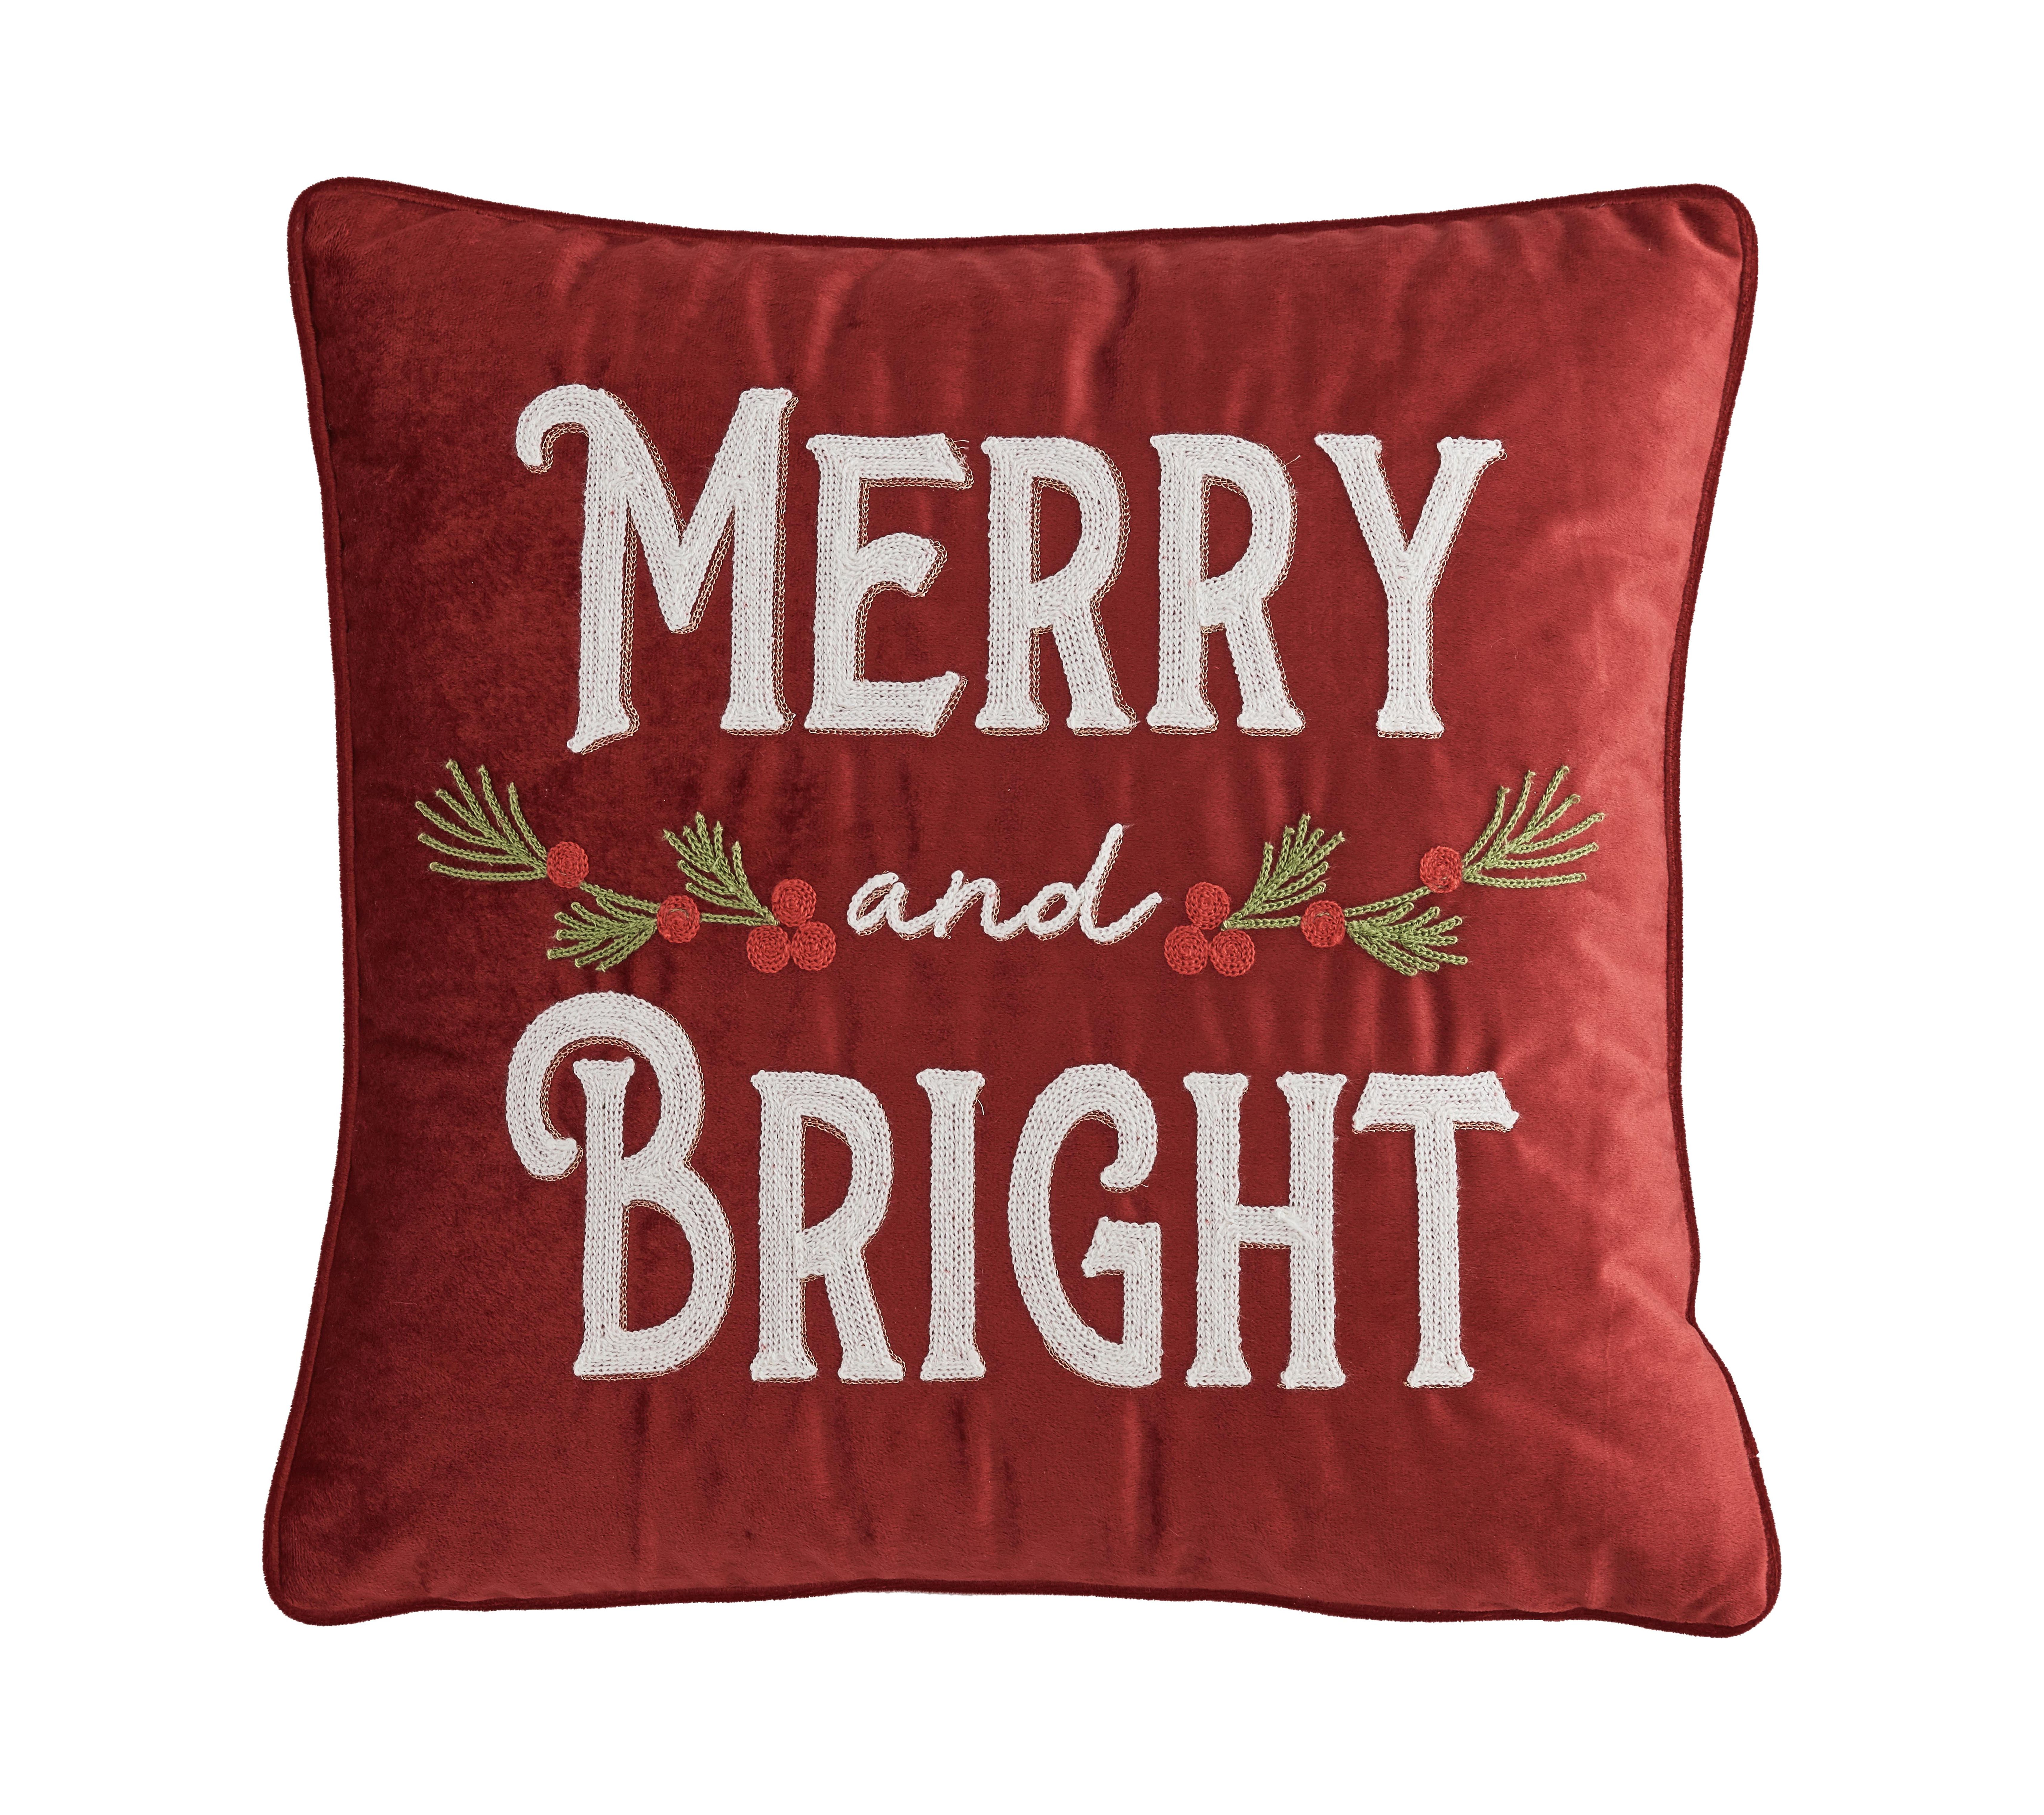 Mainstays Merry and Bright Decorative Throw Pillow, 18”x18” - image 1 of 4